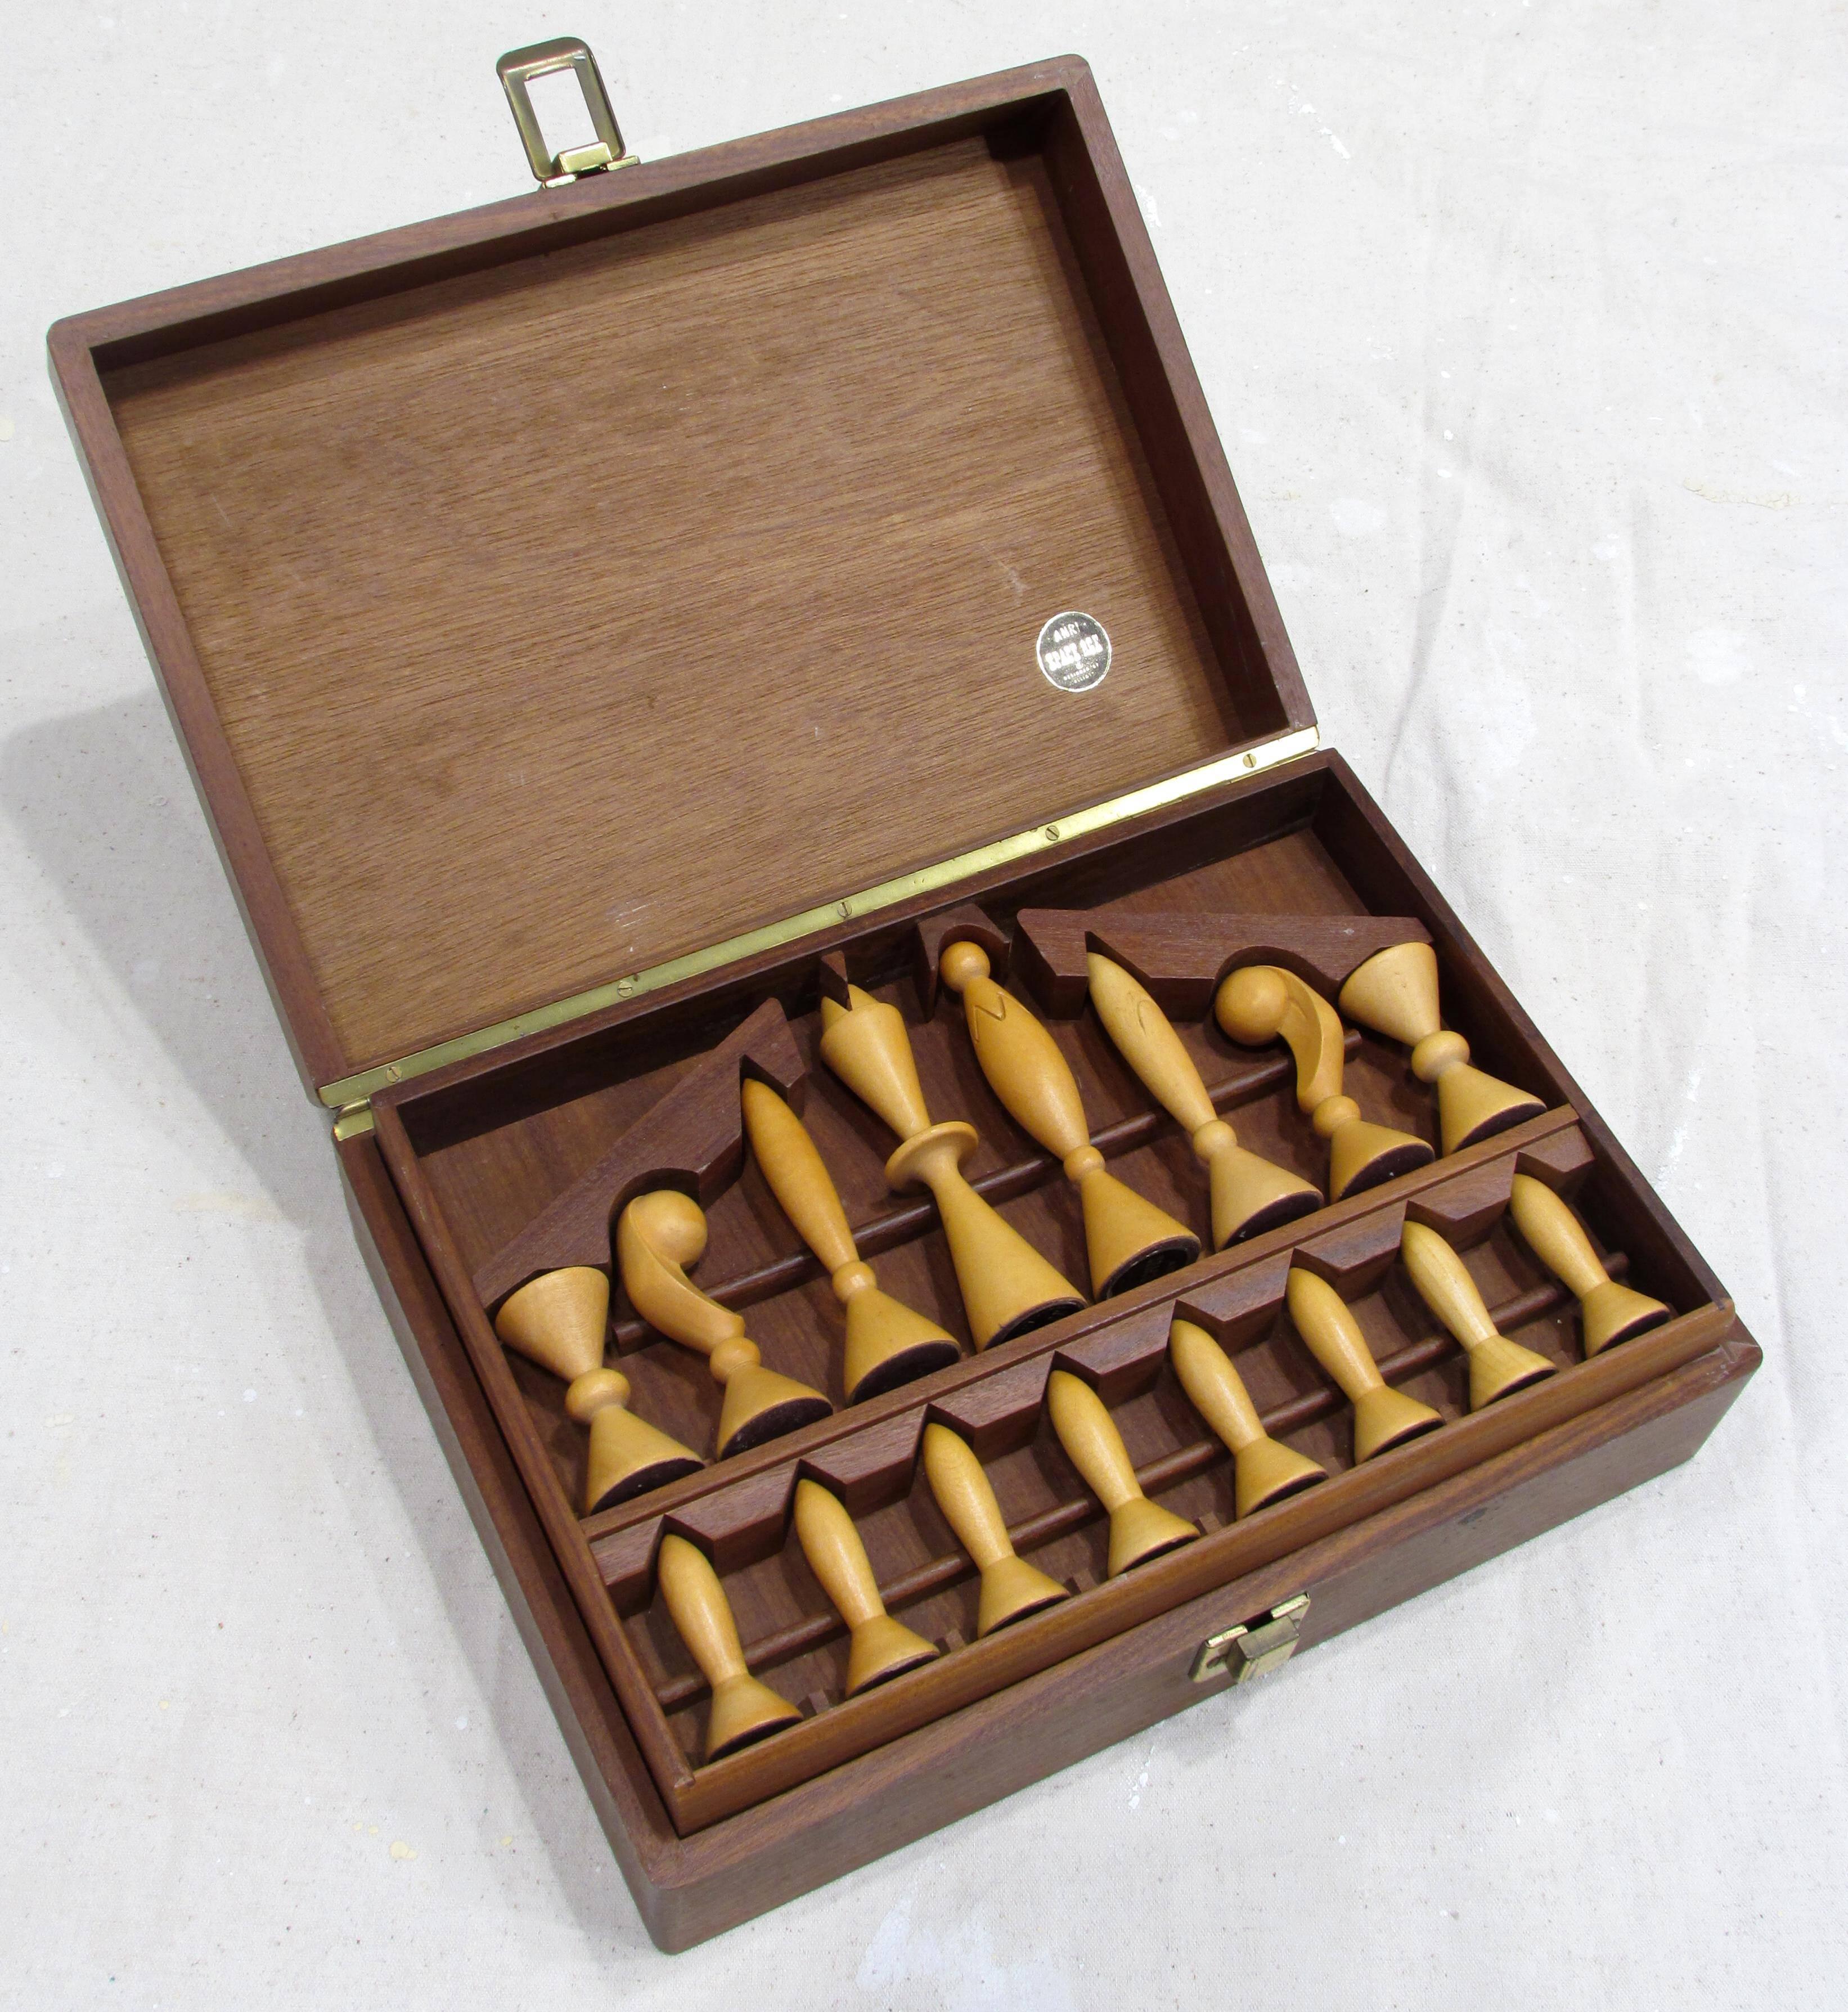 Beautiful carved "Space Age" chess set pieces designed by Arthur Elliott for ANRI contained in a hinged box with removable compartmentalized tray to contain the lighter wood pieces and in the bottom are the darker wood pieces marked with